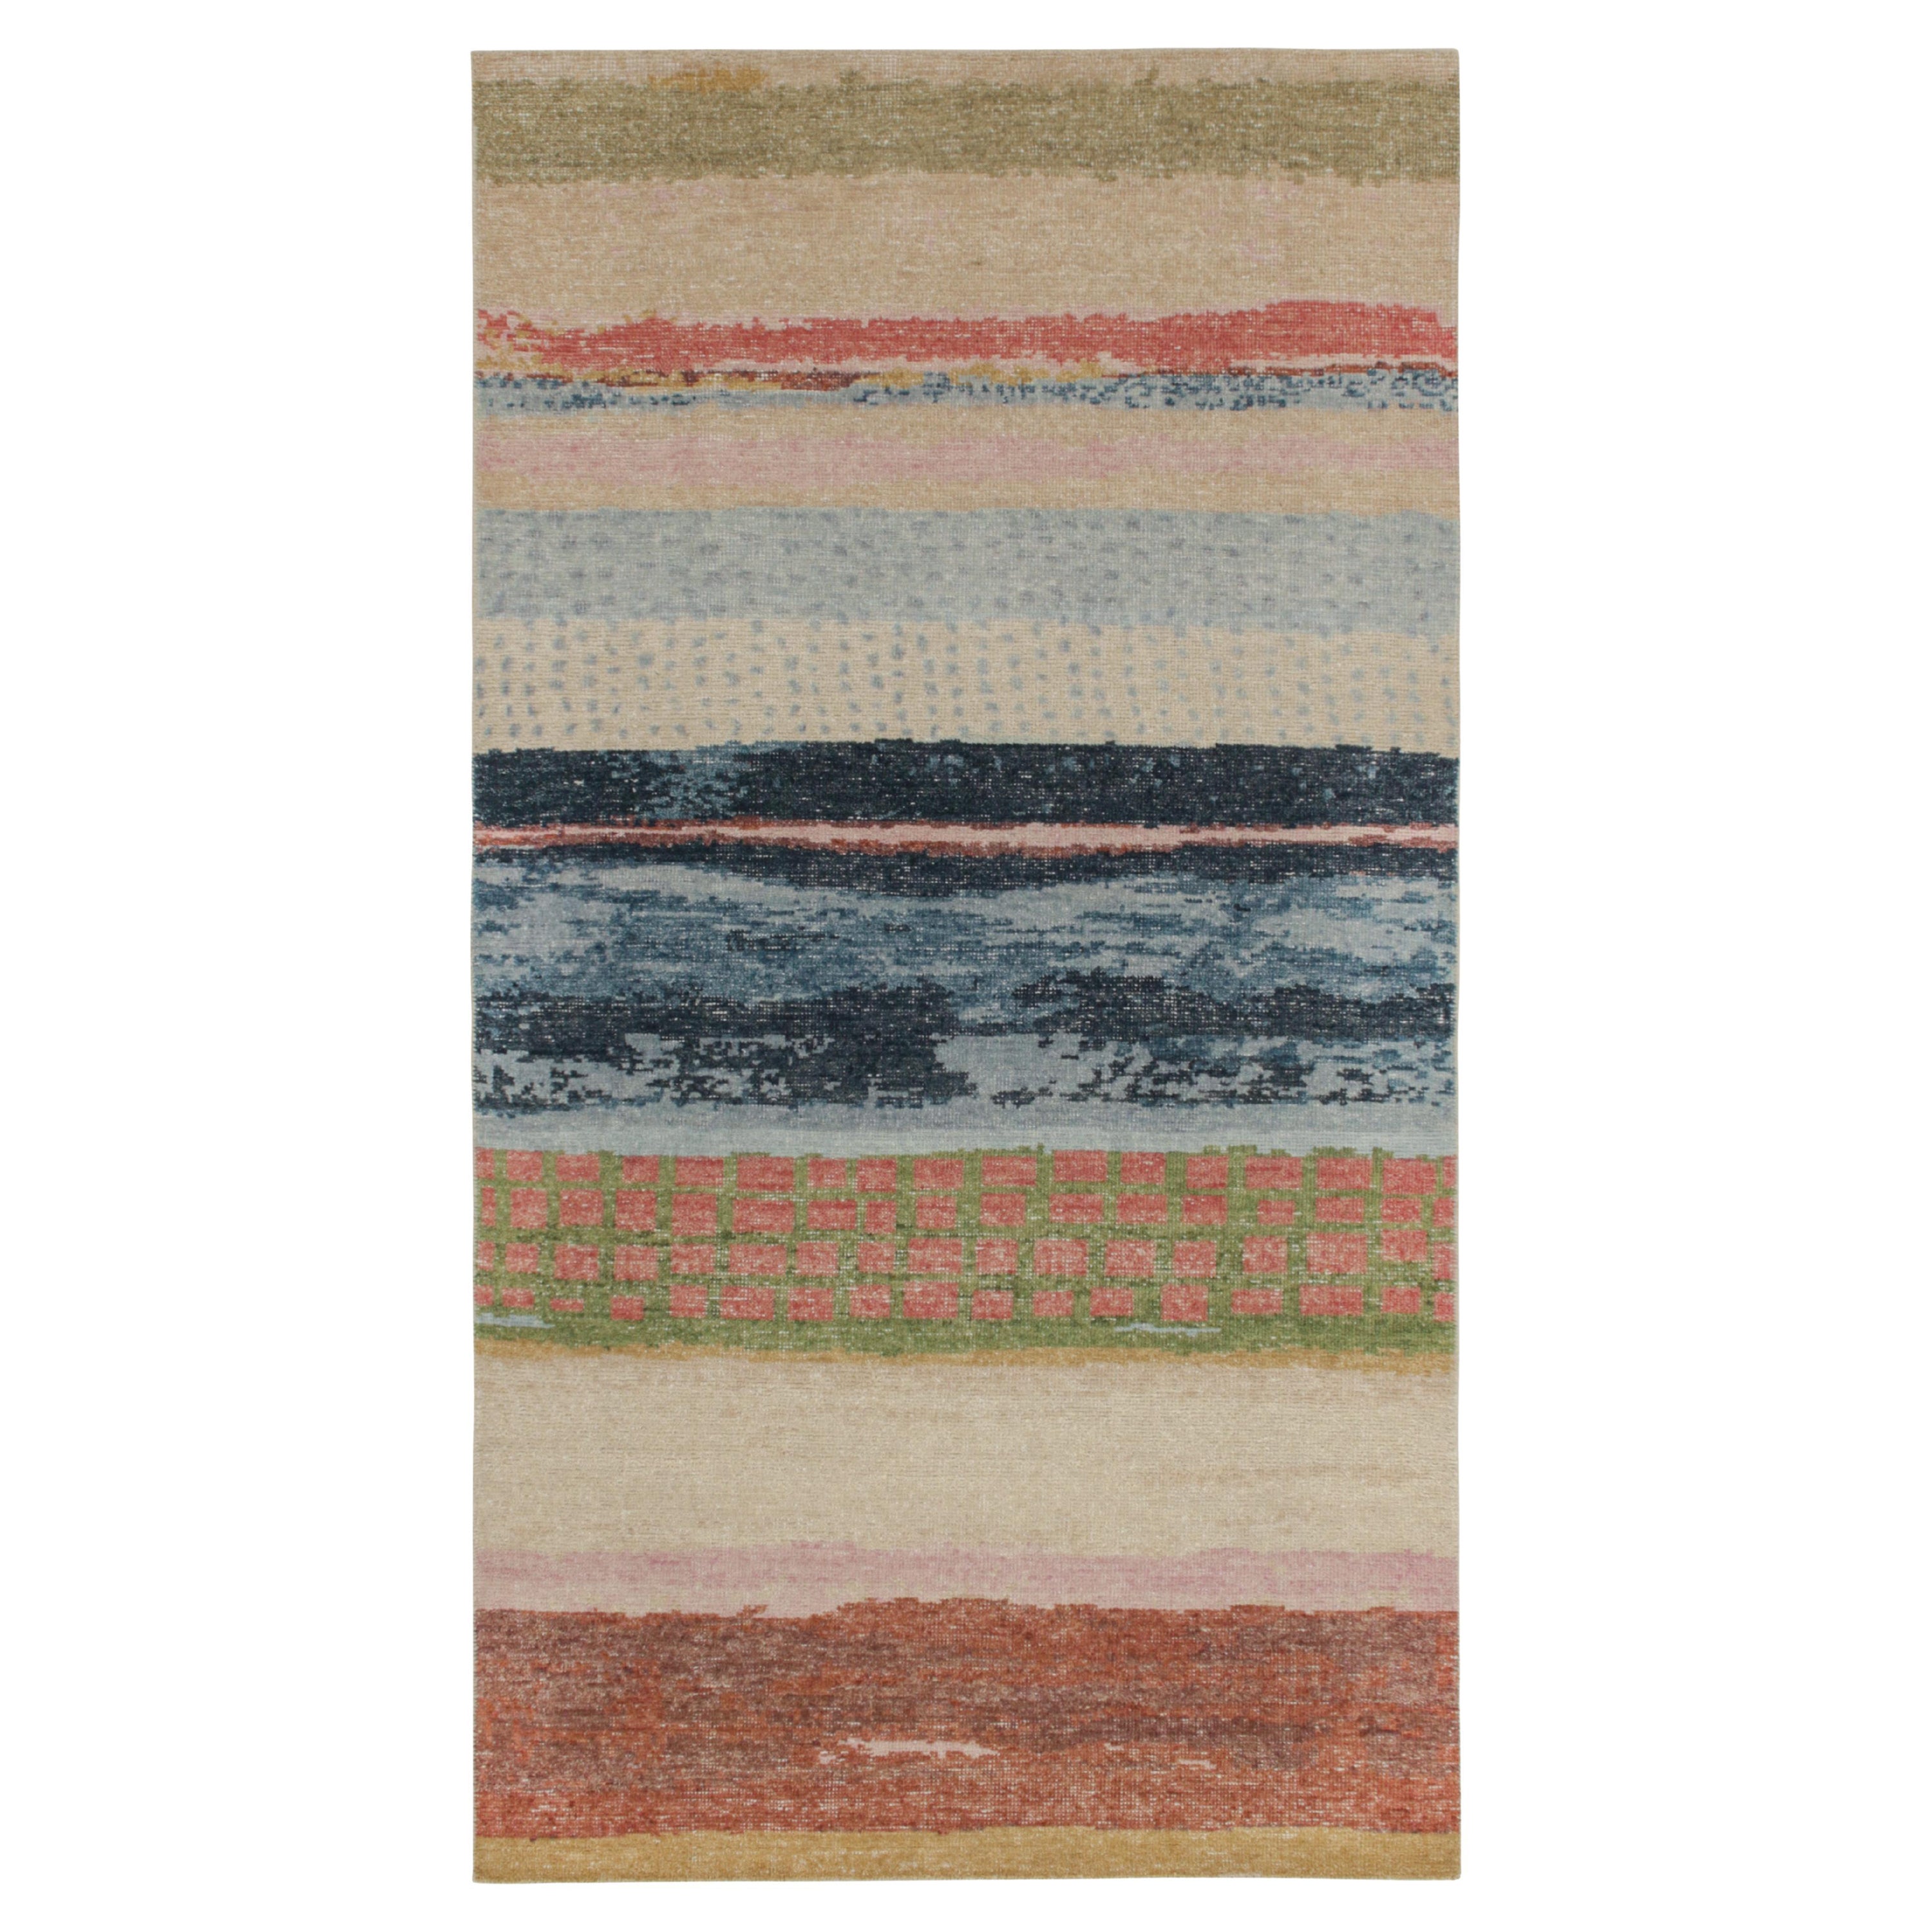 Rug & Kilim's Distressed style Abstract Rug in Polychromatic Pattern (Tapis abstrait à motifs polychromes)